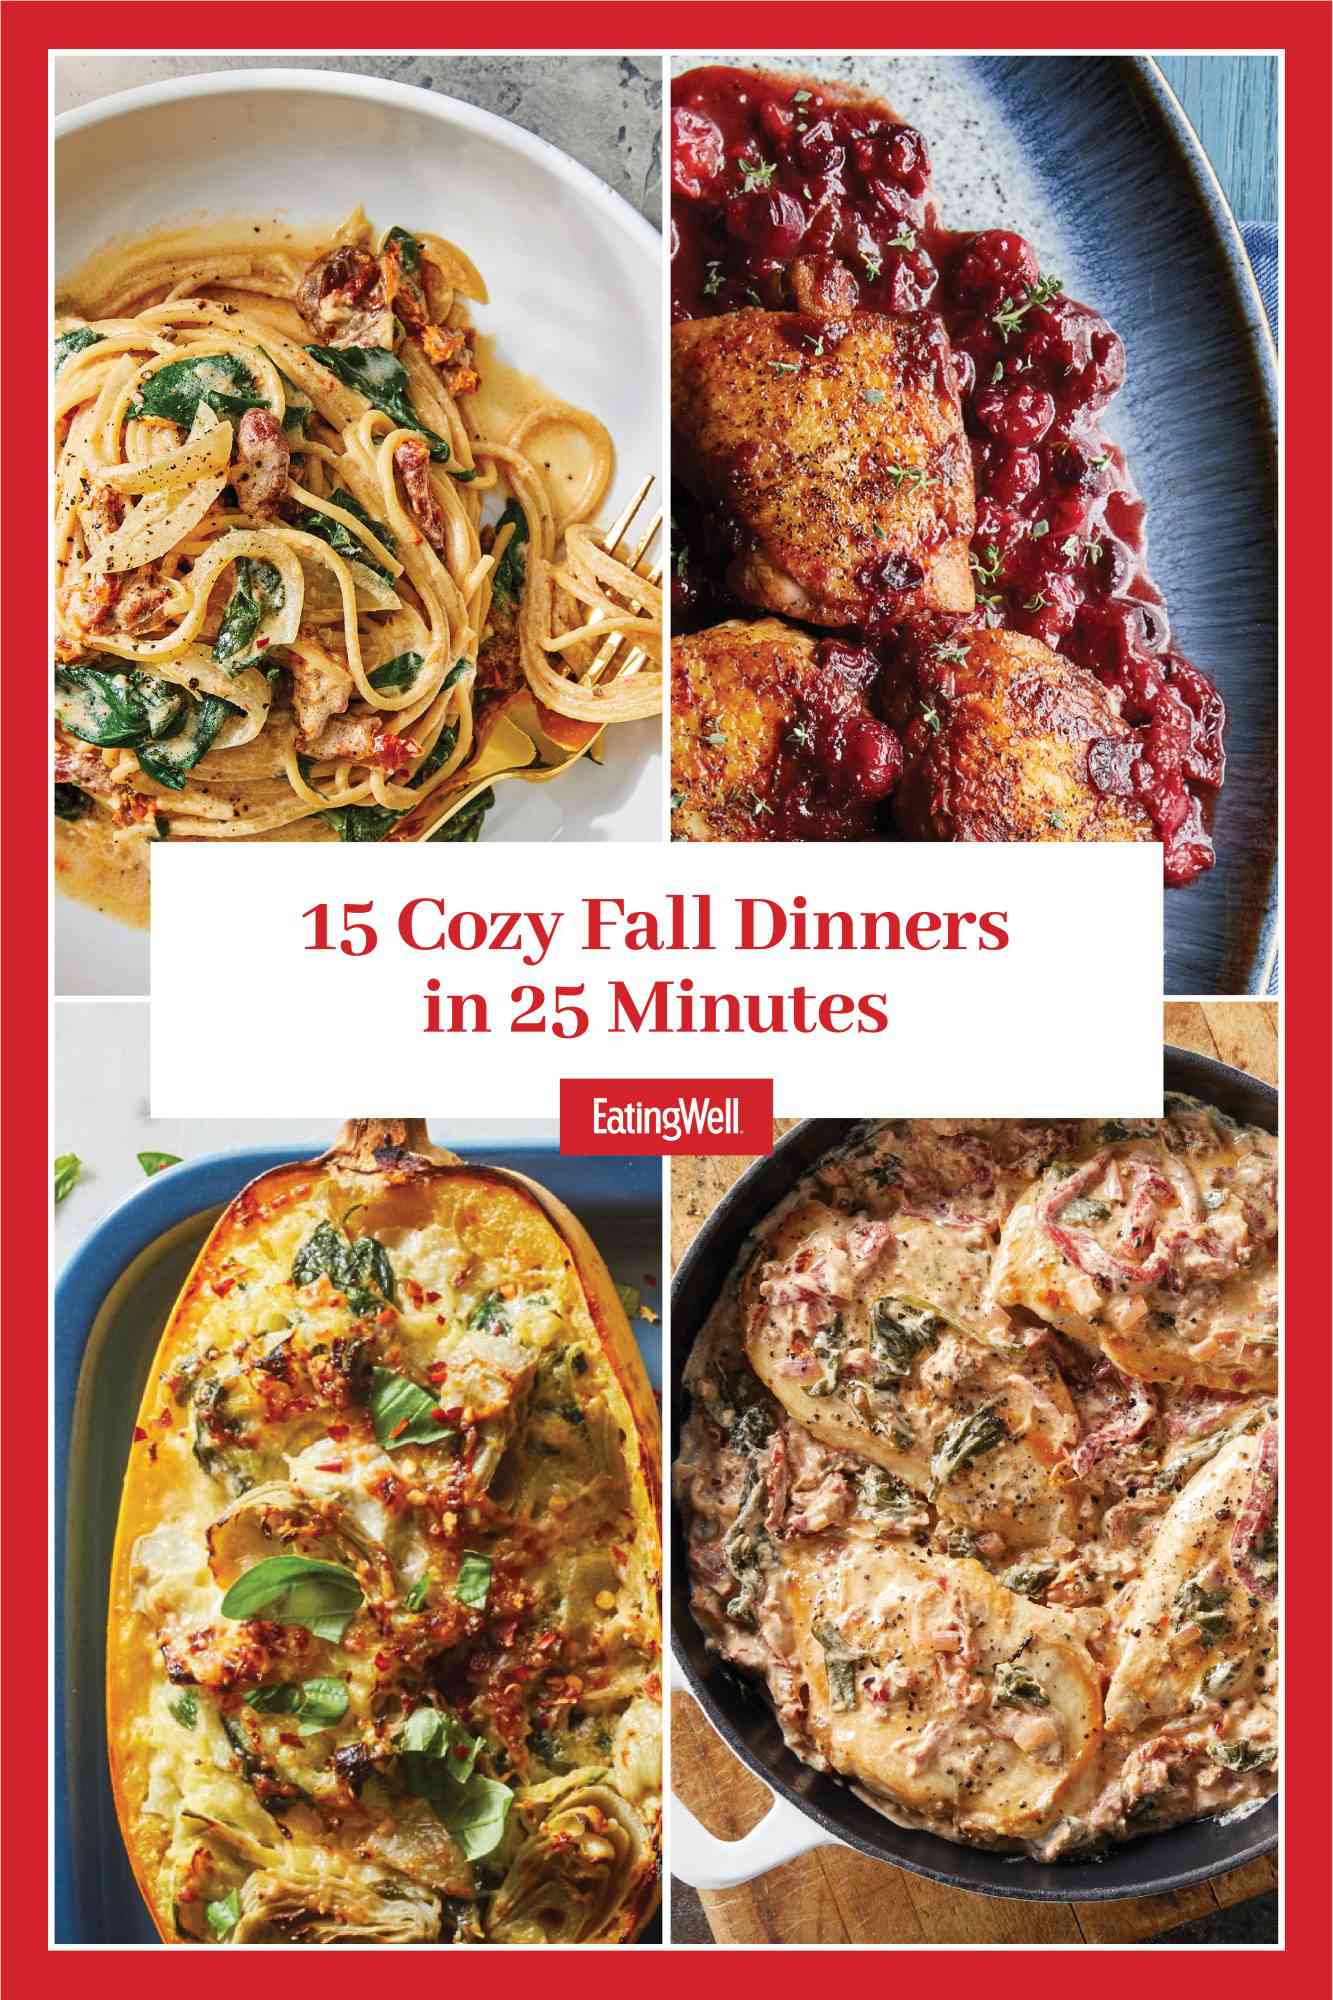 a collage of some of the 15 Cozy Fall Dinners in 25 Minutes